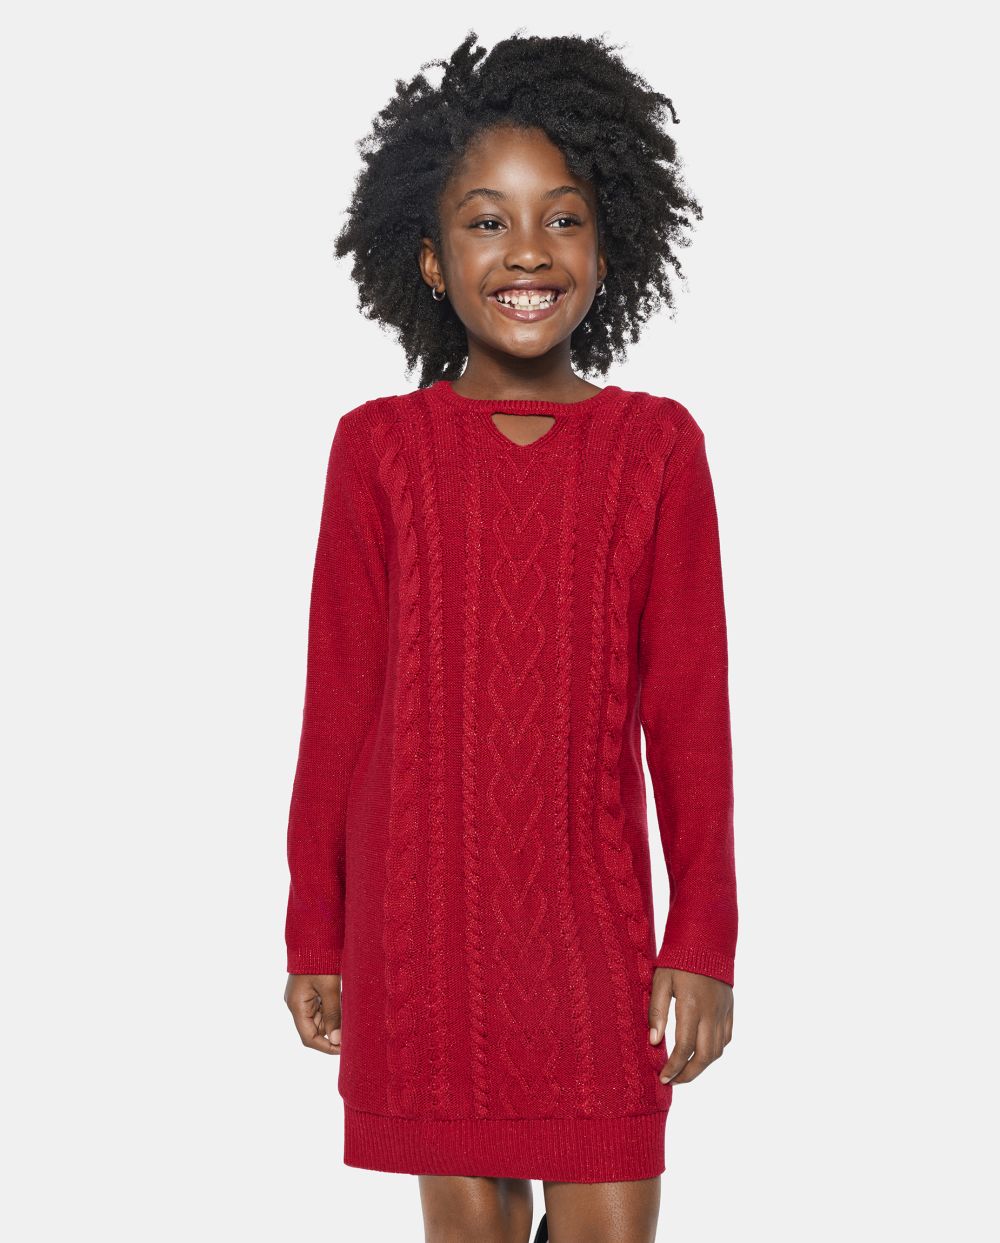 Girls Long Sleeves Crew Neck Cutout Sweater Above the Knee Dress